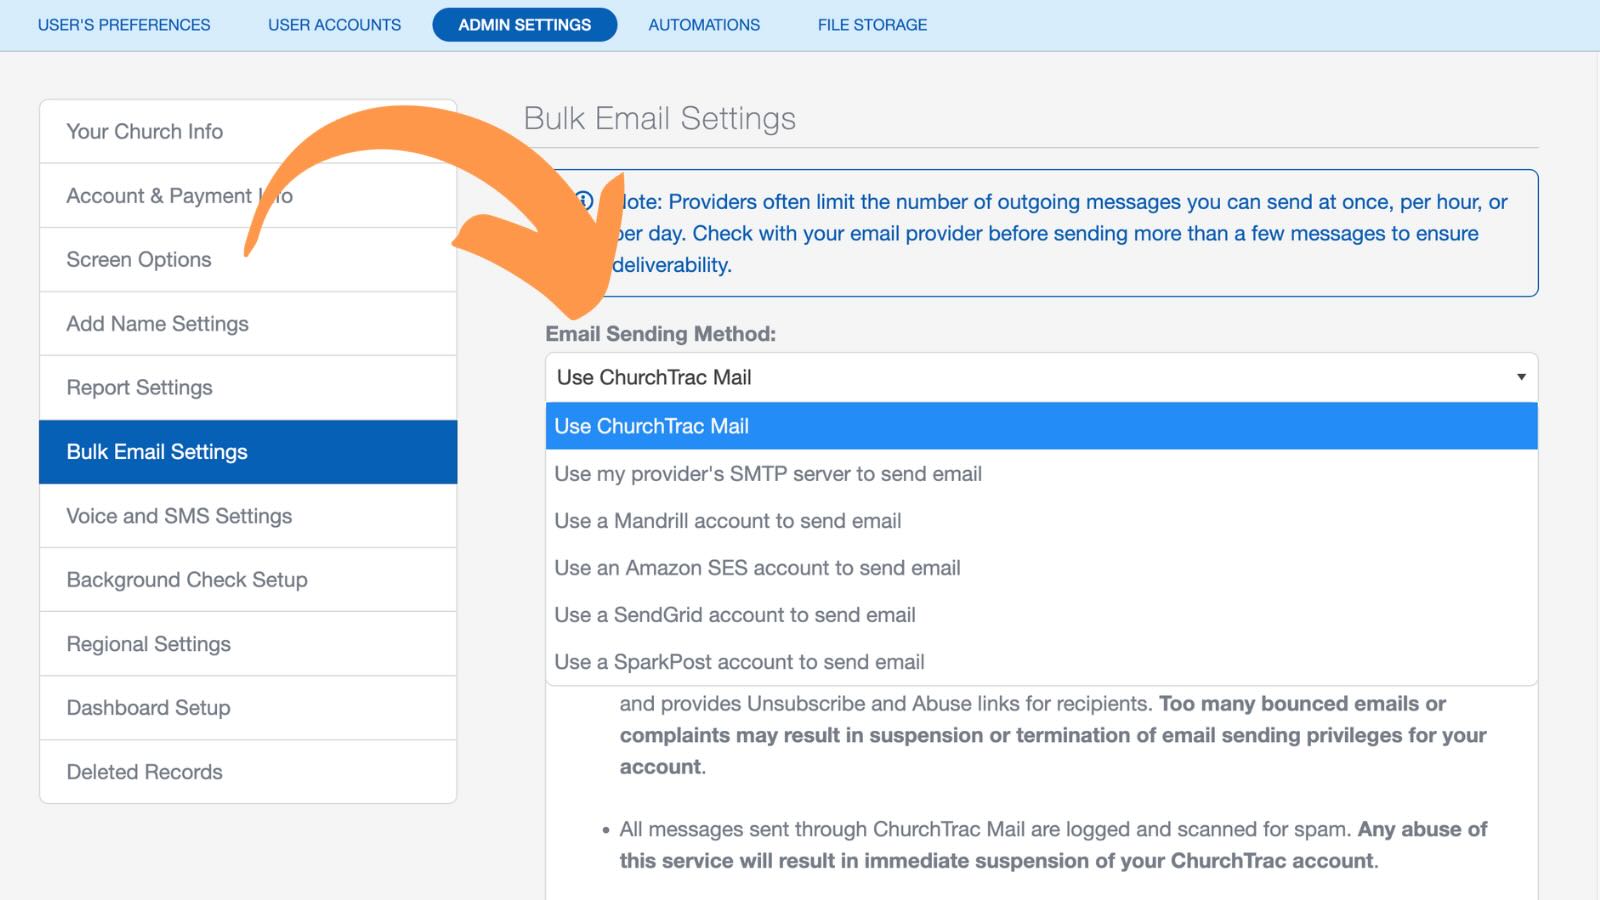 How to enable and use ChurchTrac Mail for mass email at your church